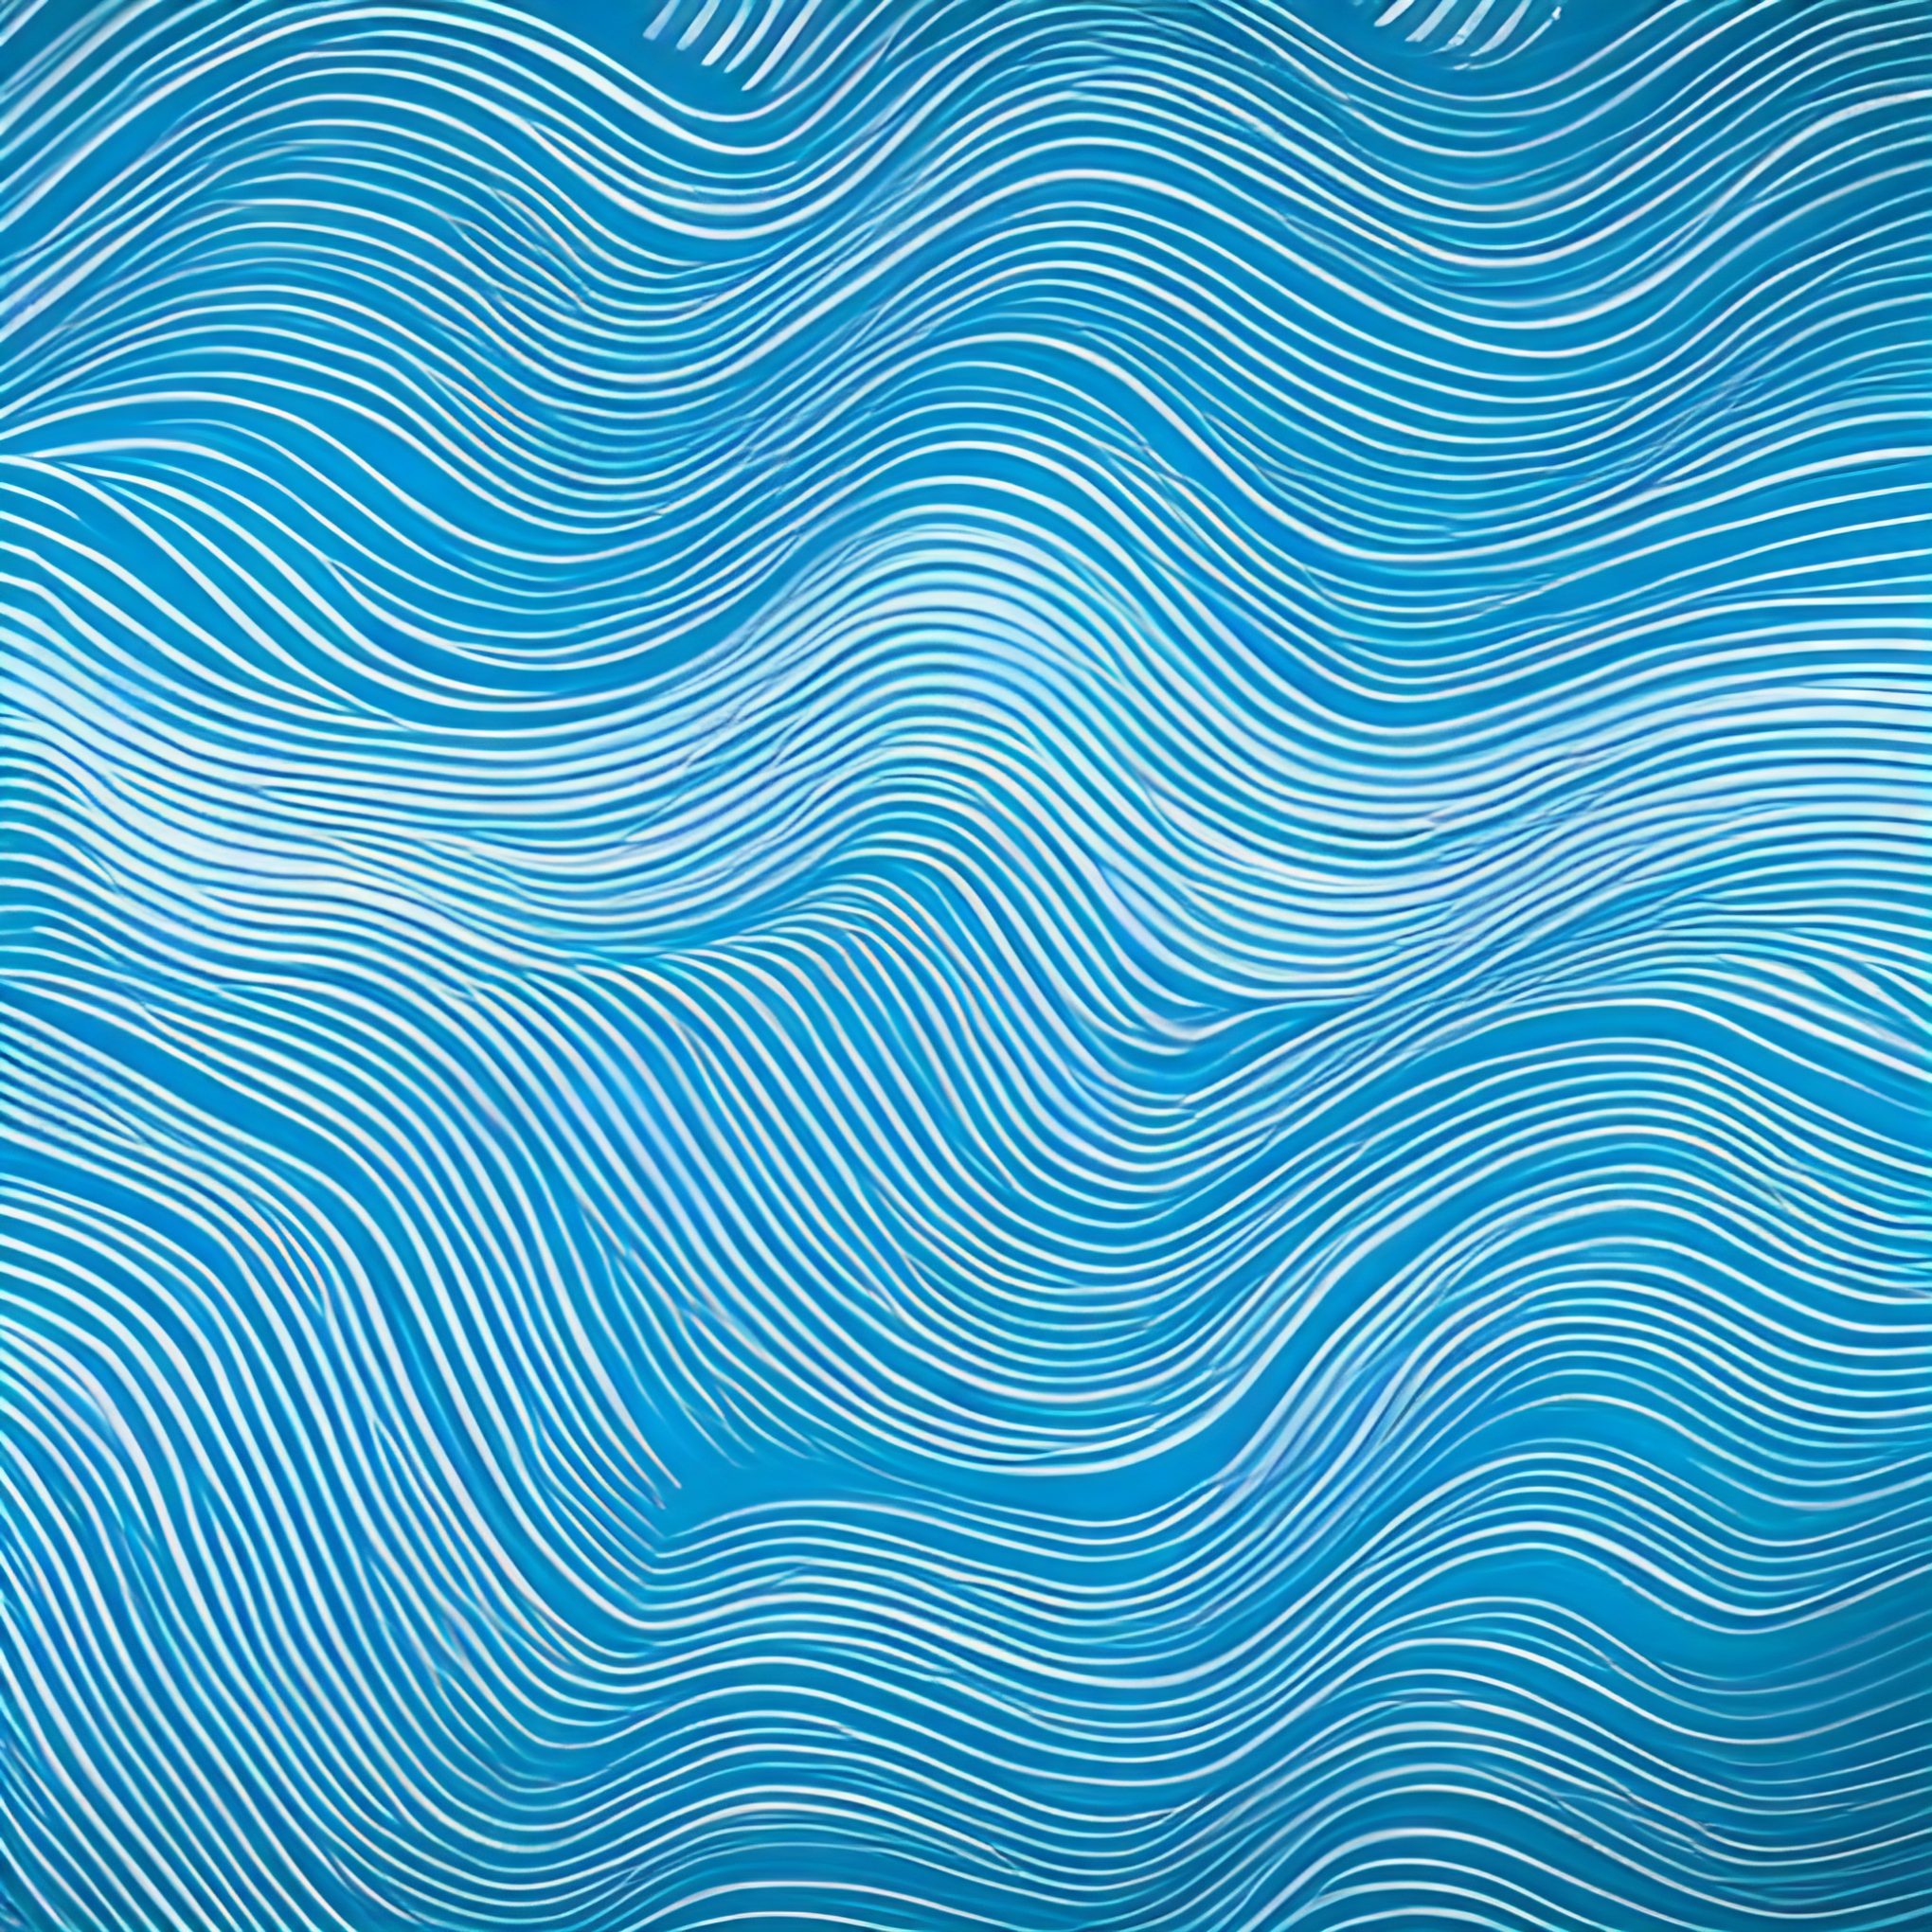 Abstract Blue Waves Background Pattern Free Stock Image